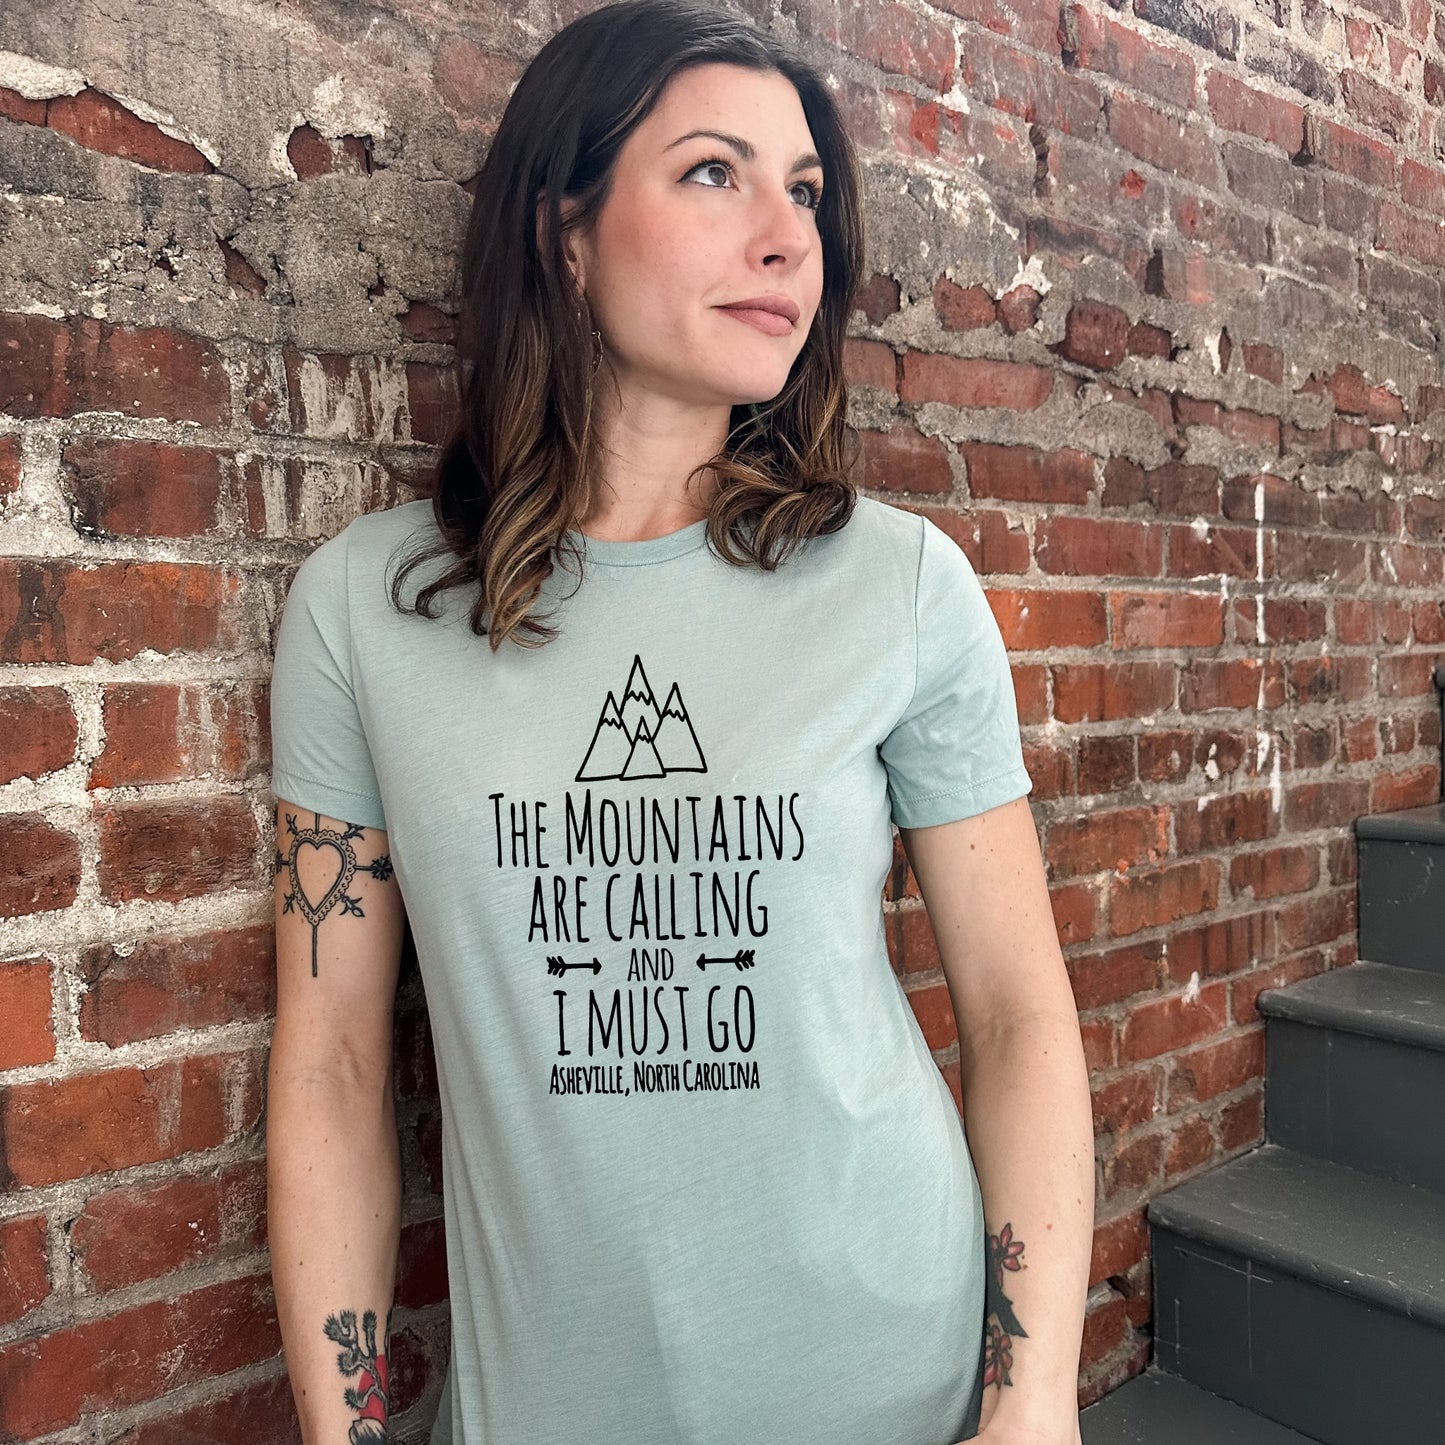 The Mountains Are Calling And I Must Go, Asheville North Carolina - Women's Crew Tee - Olive or Dusty Blue